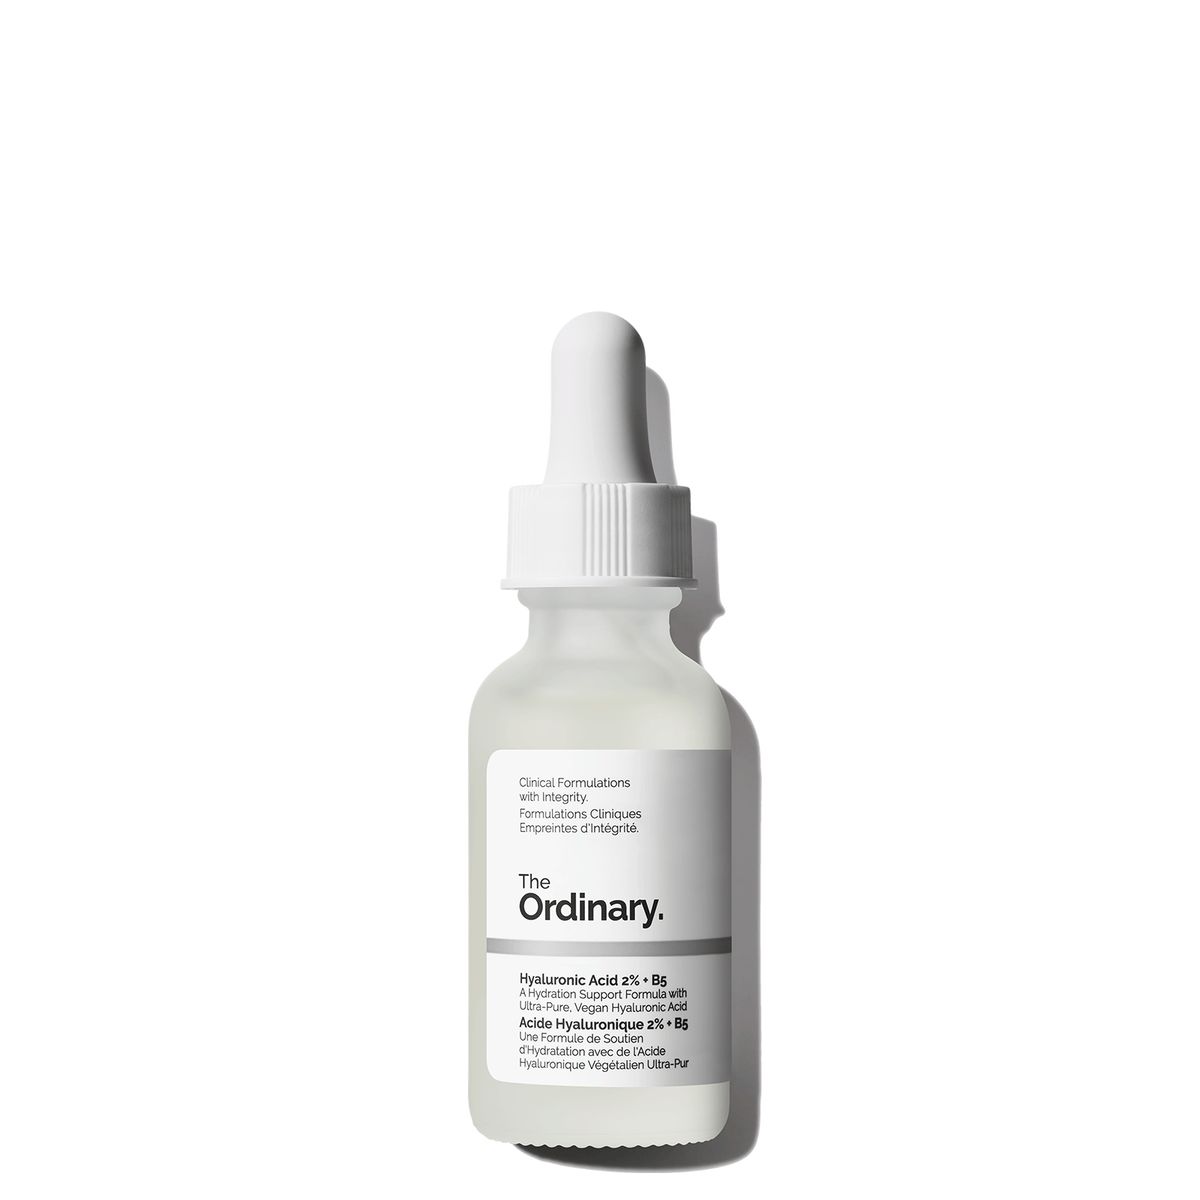 The Ordinary Hyaluronic Acid 2% + B5Hyaluronic Acid 2% + B5 | The Ordinary